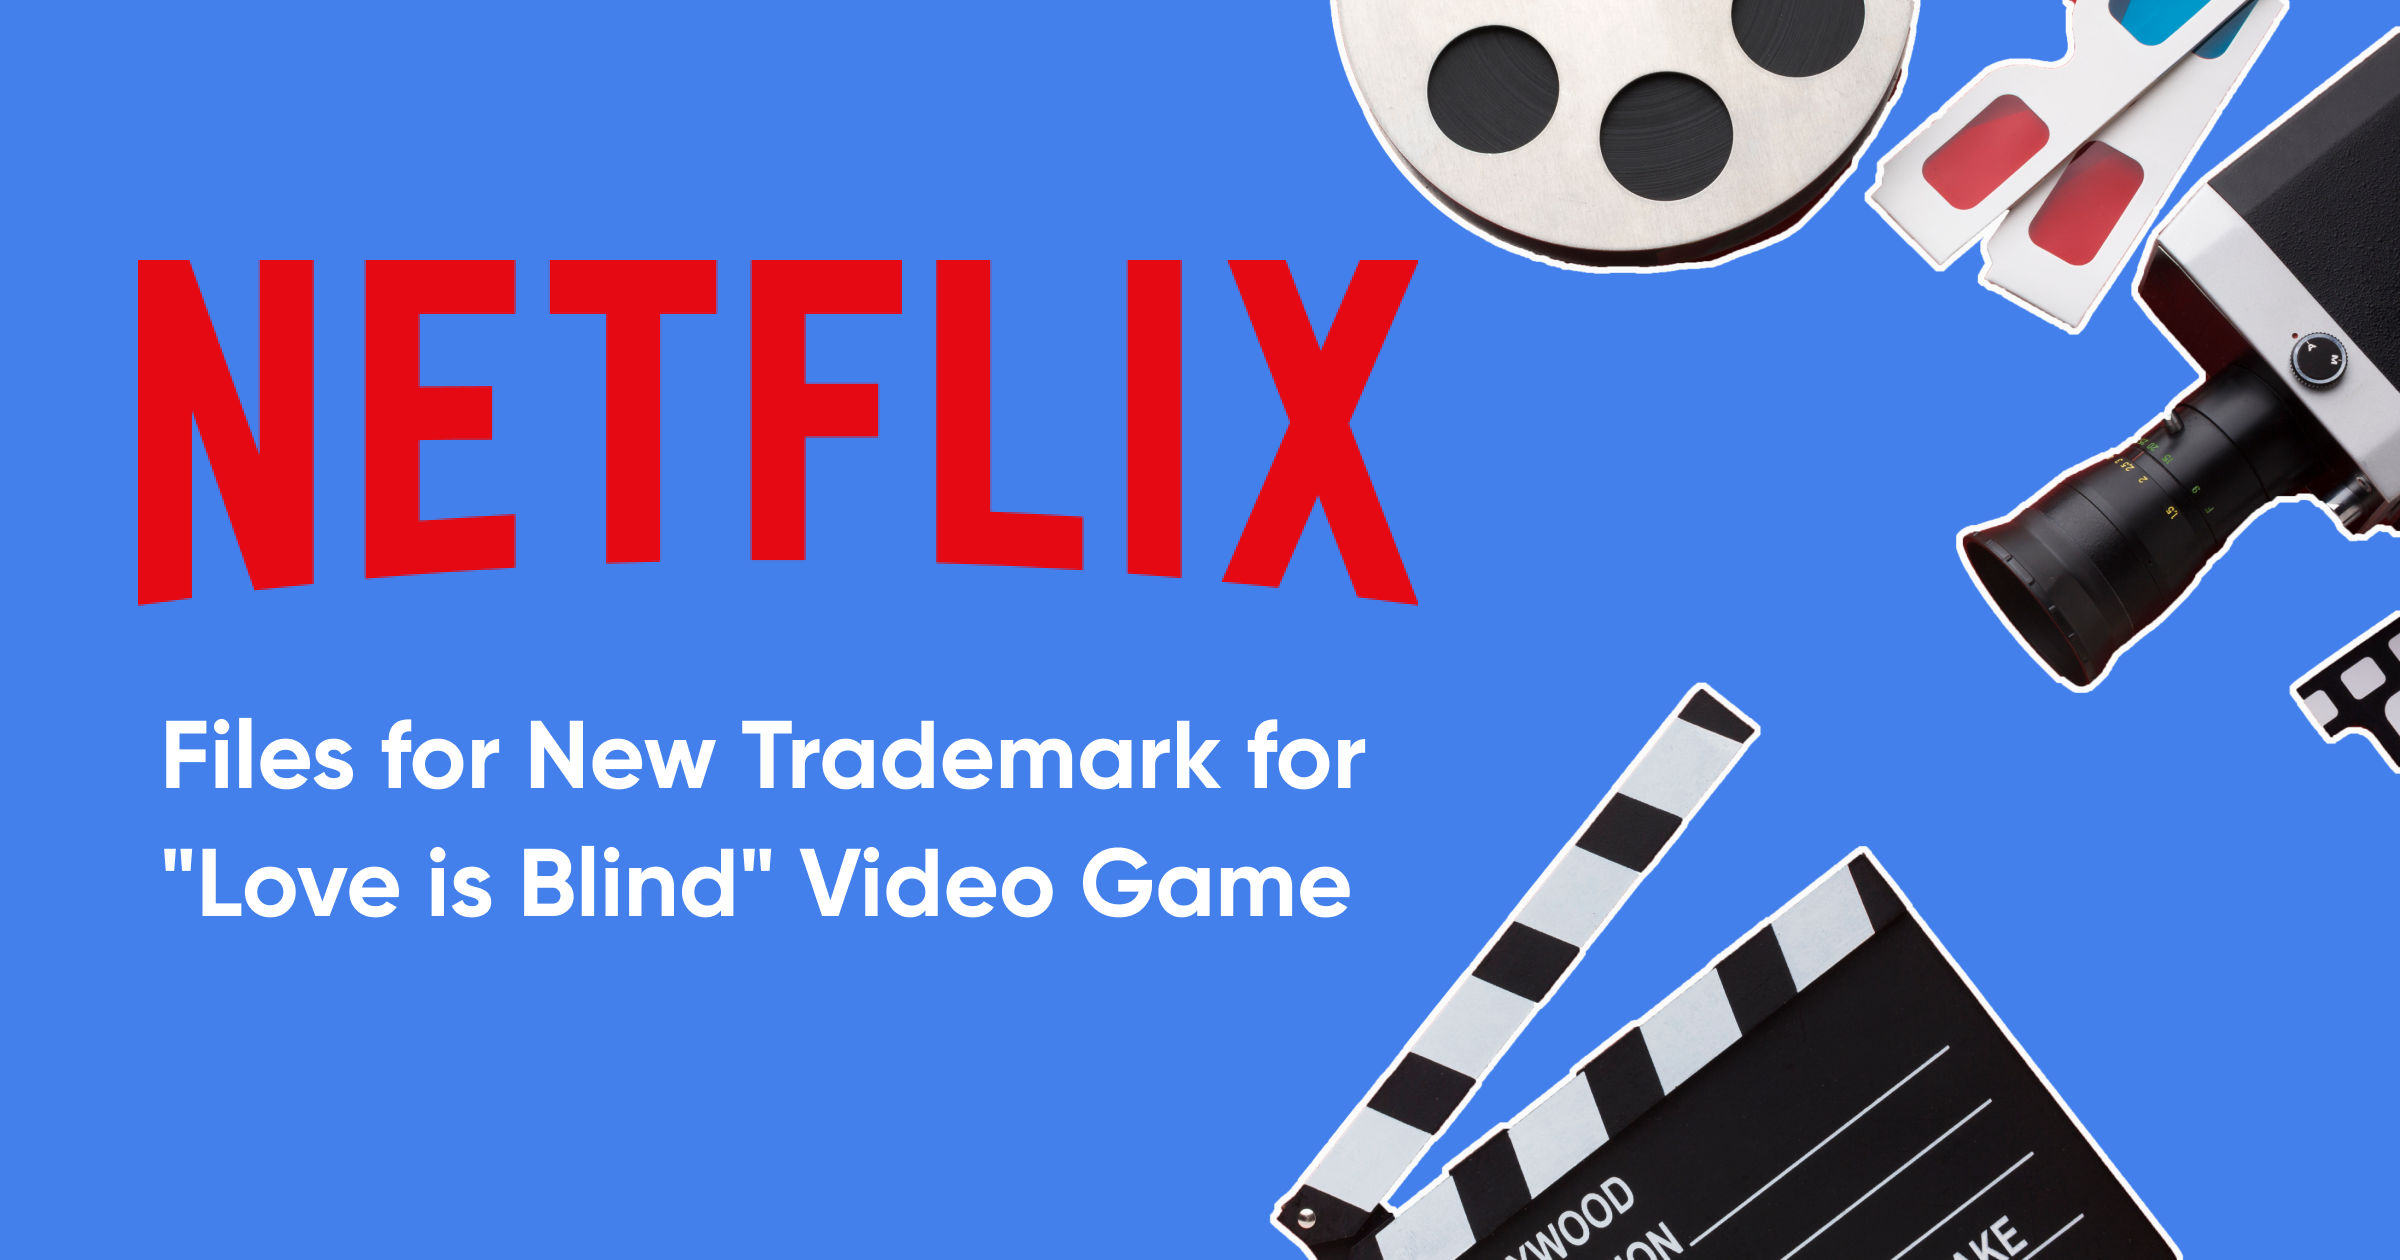 Netflix Files for New Trademark for "Love is Blind" Video Game